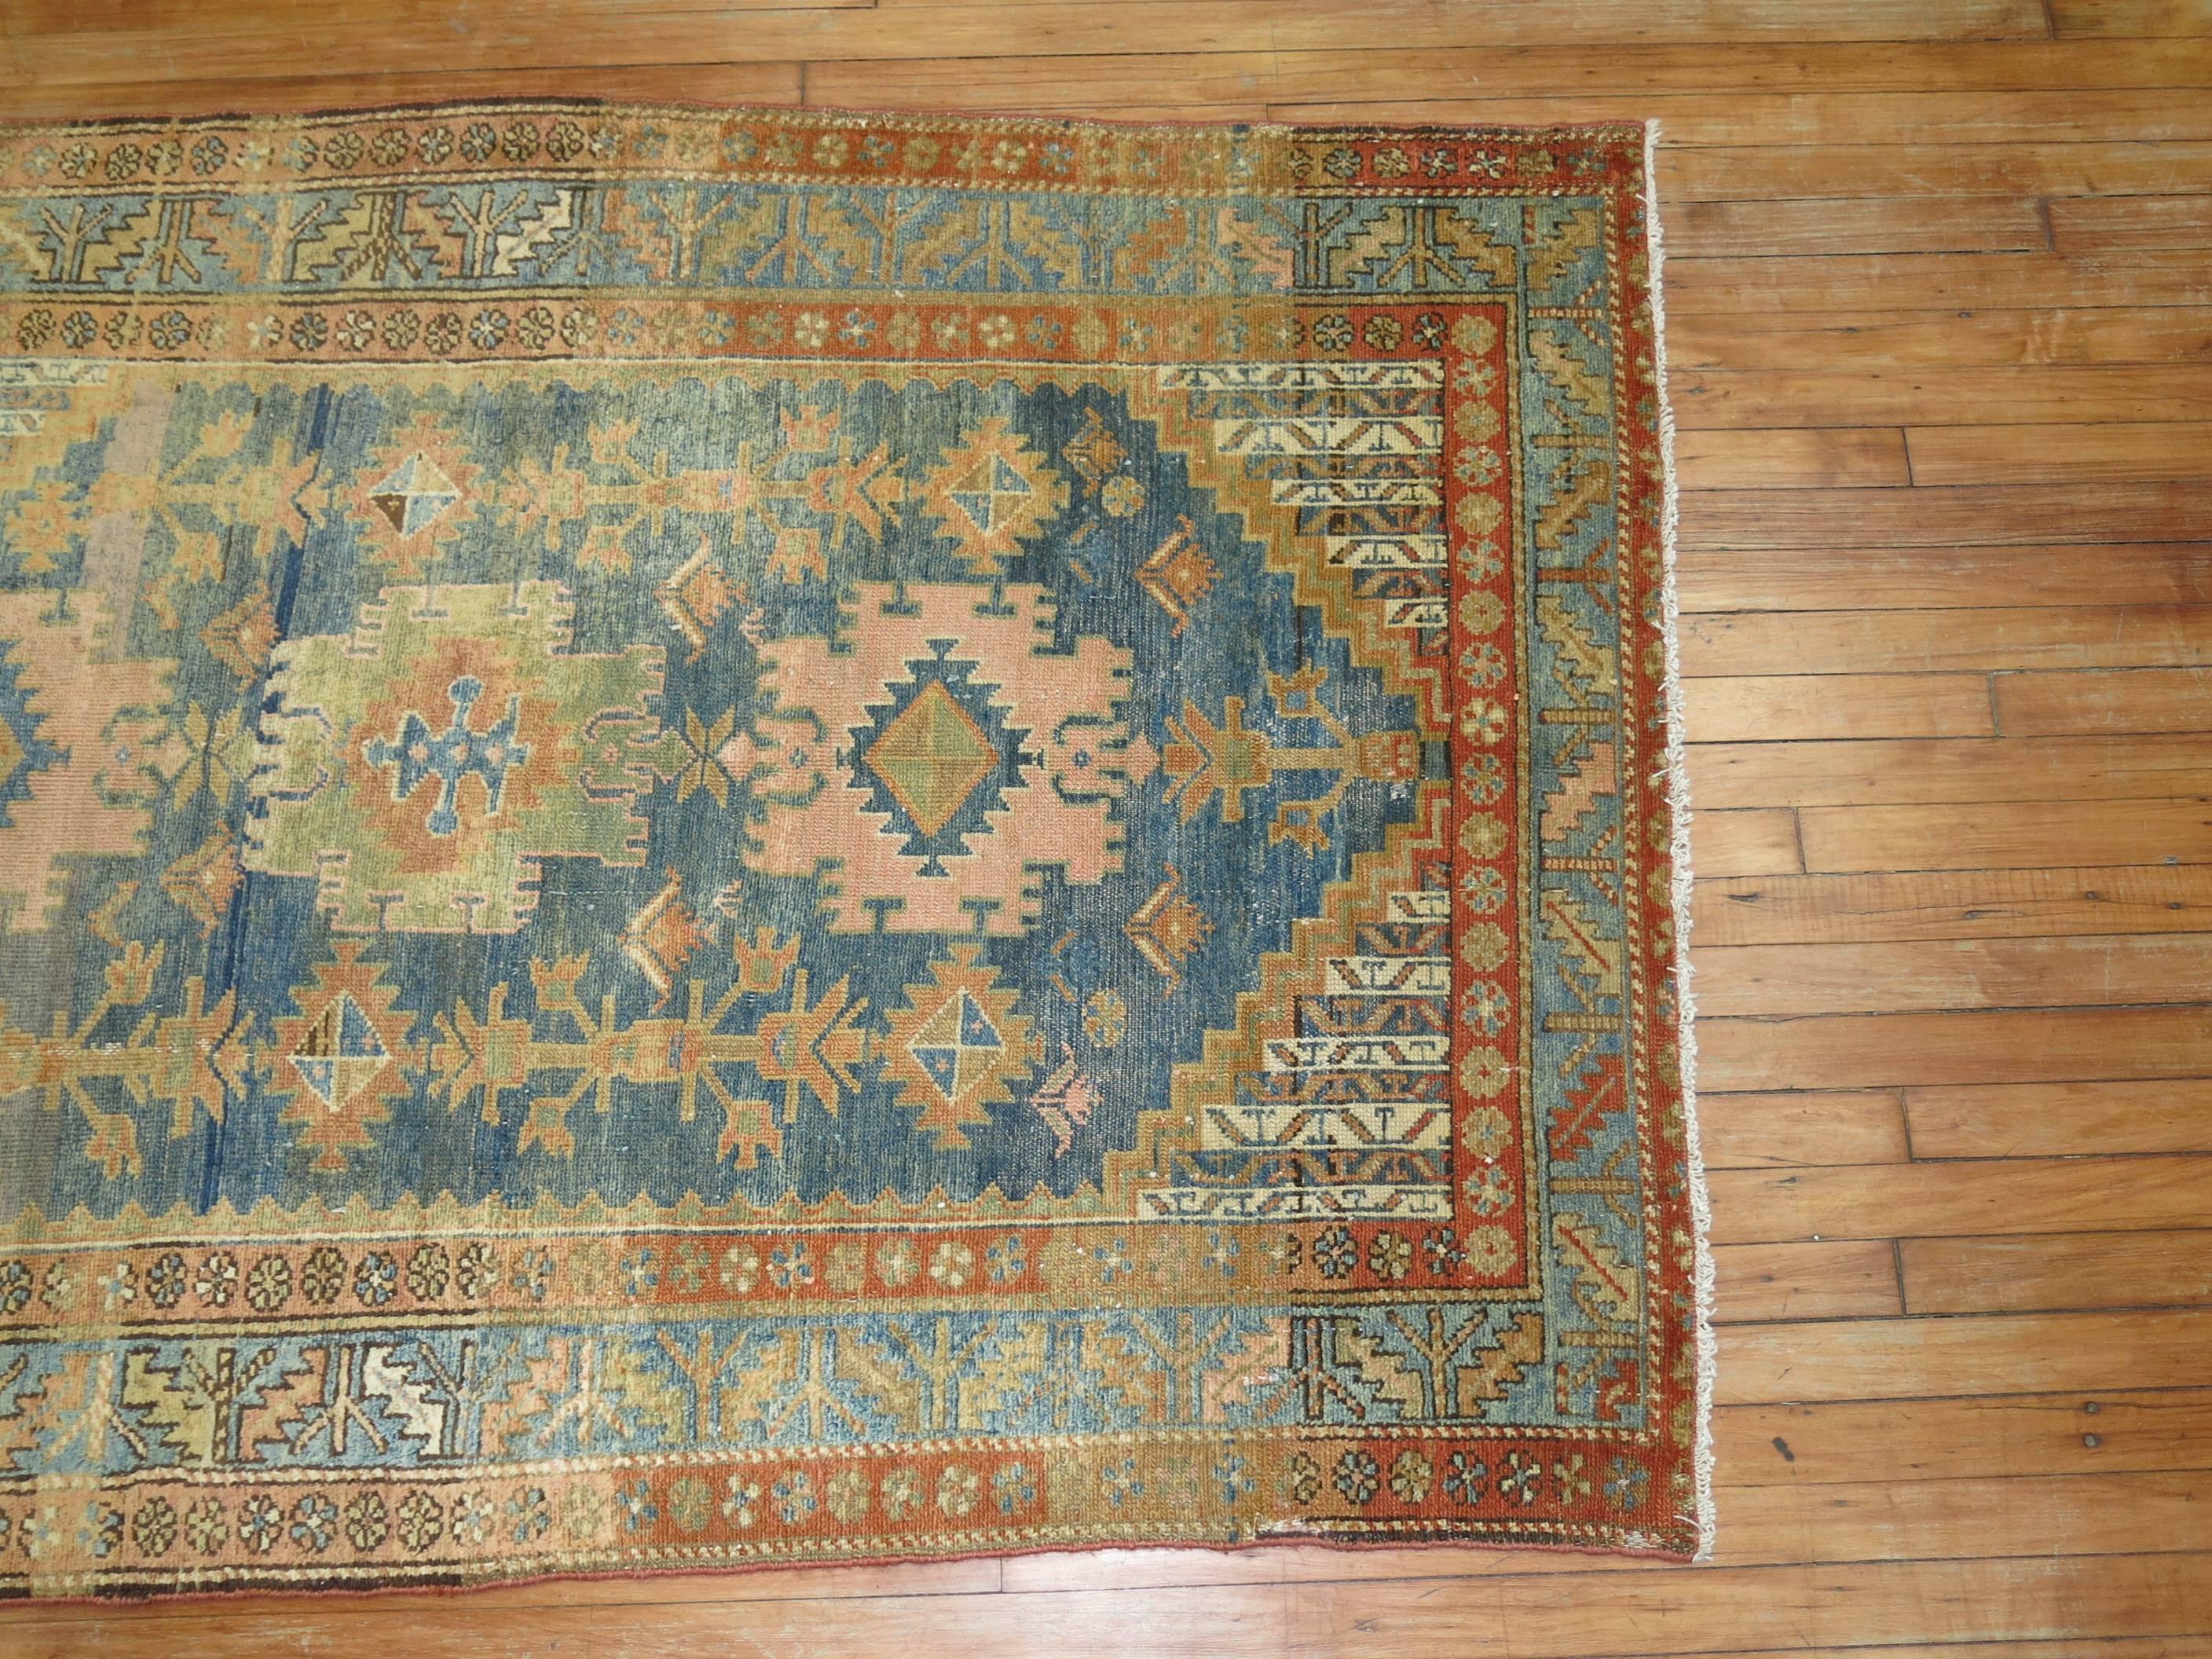 A Persian Malayer rug in pale blue and apricot tones.